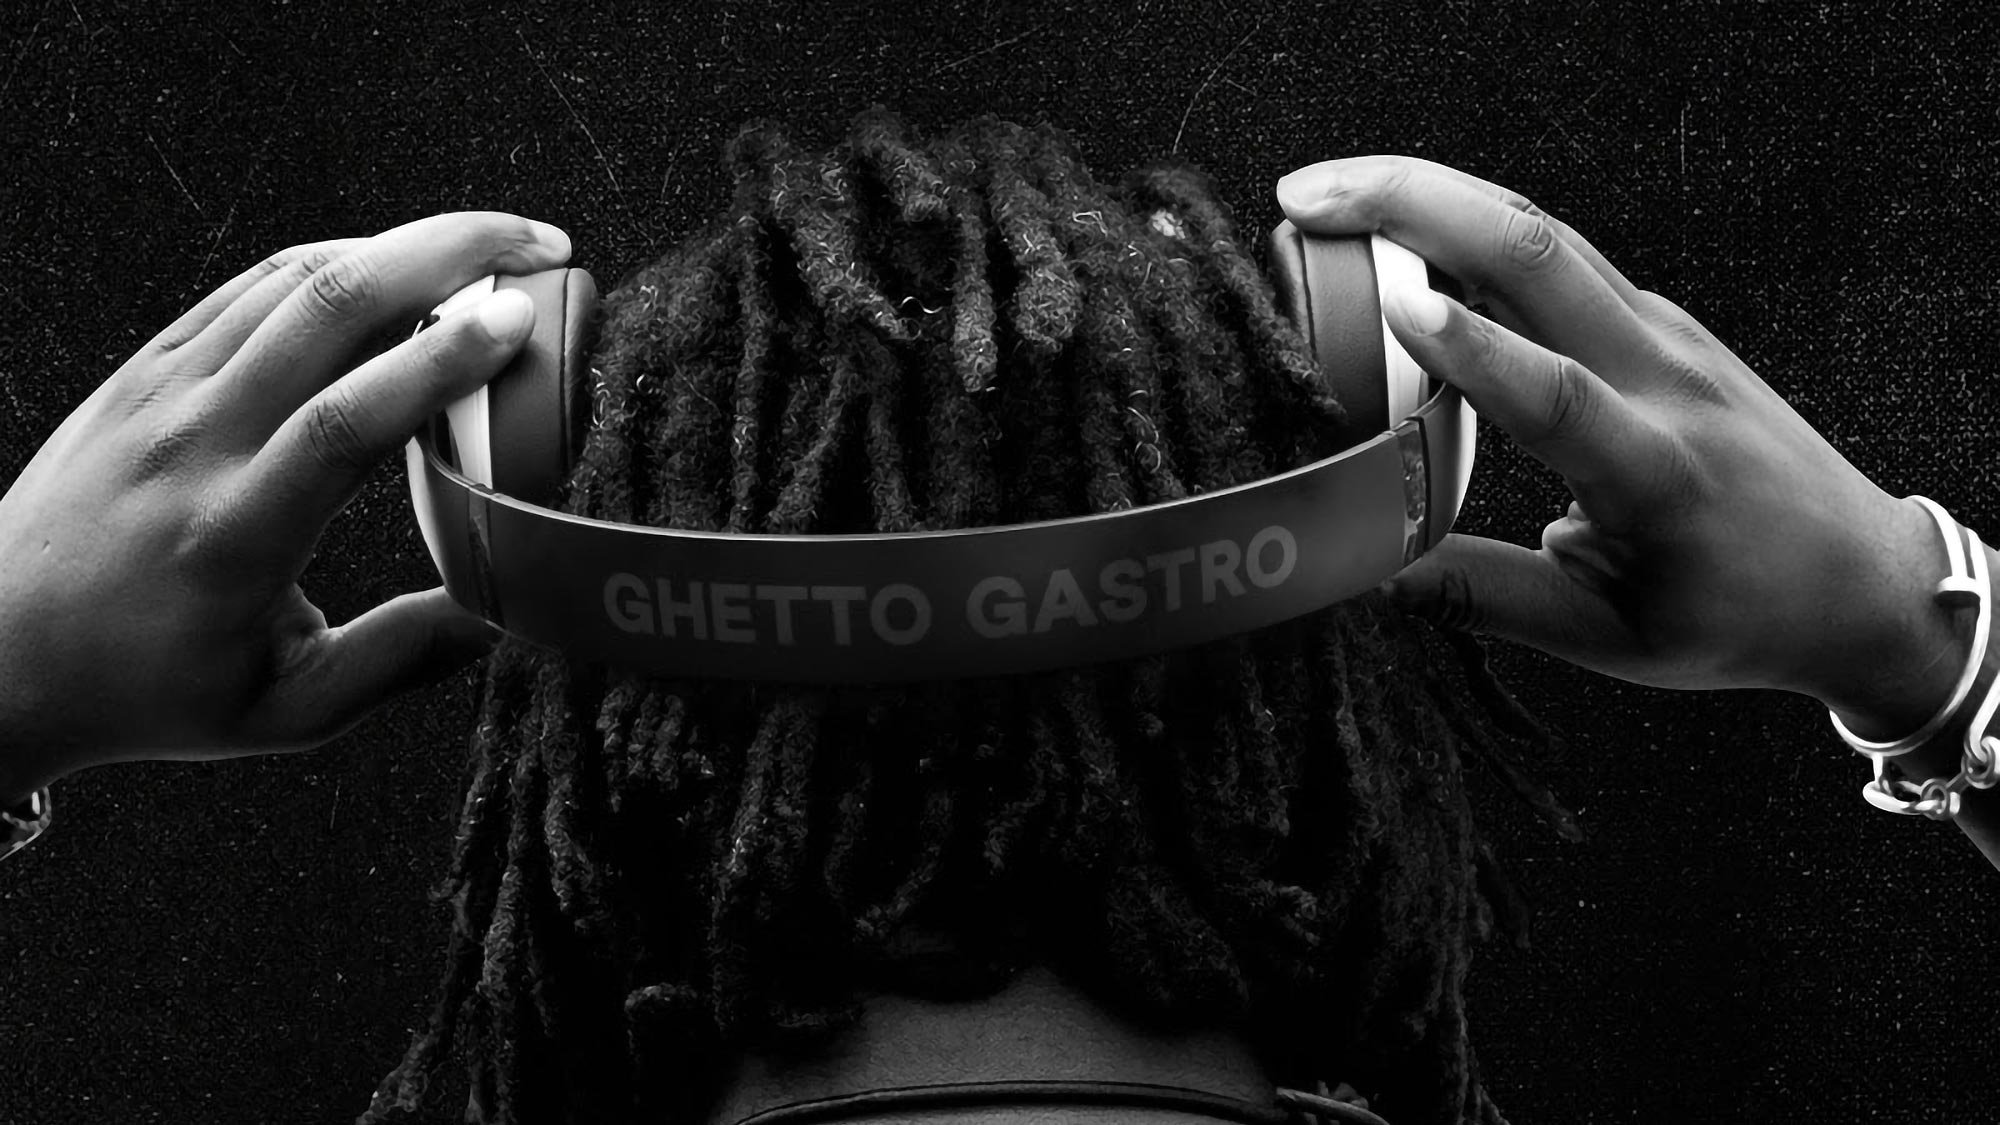 Ghetto Gastro Collaborate With Beats on Limited Edition Studio3 Headphones